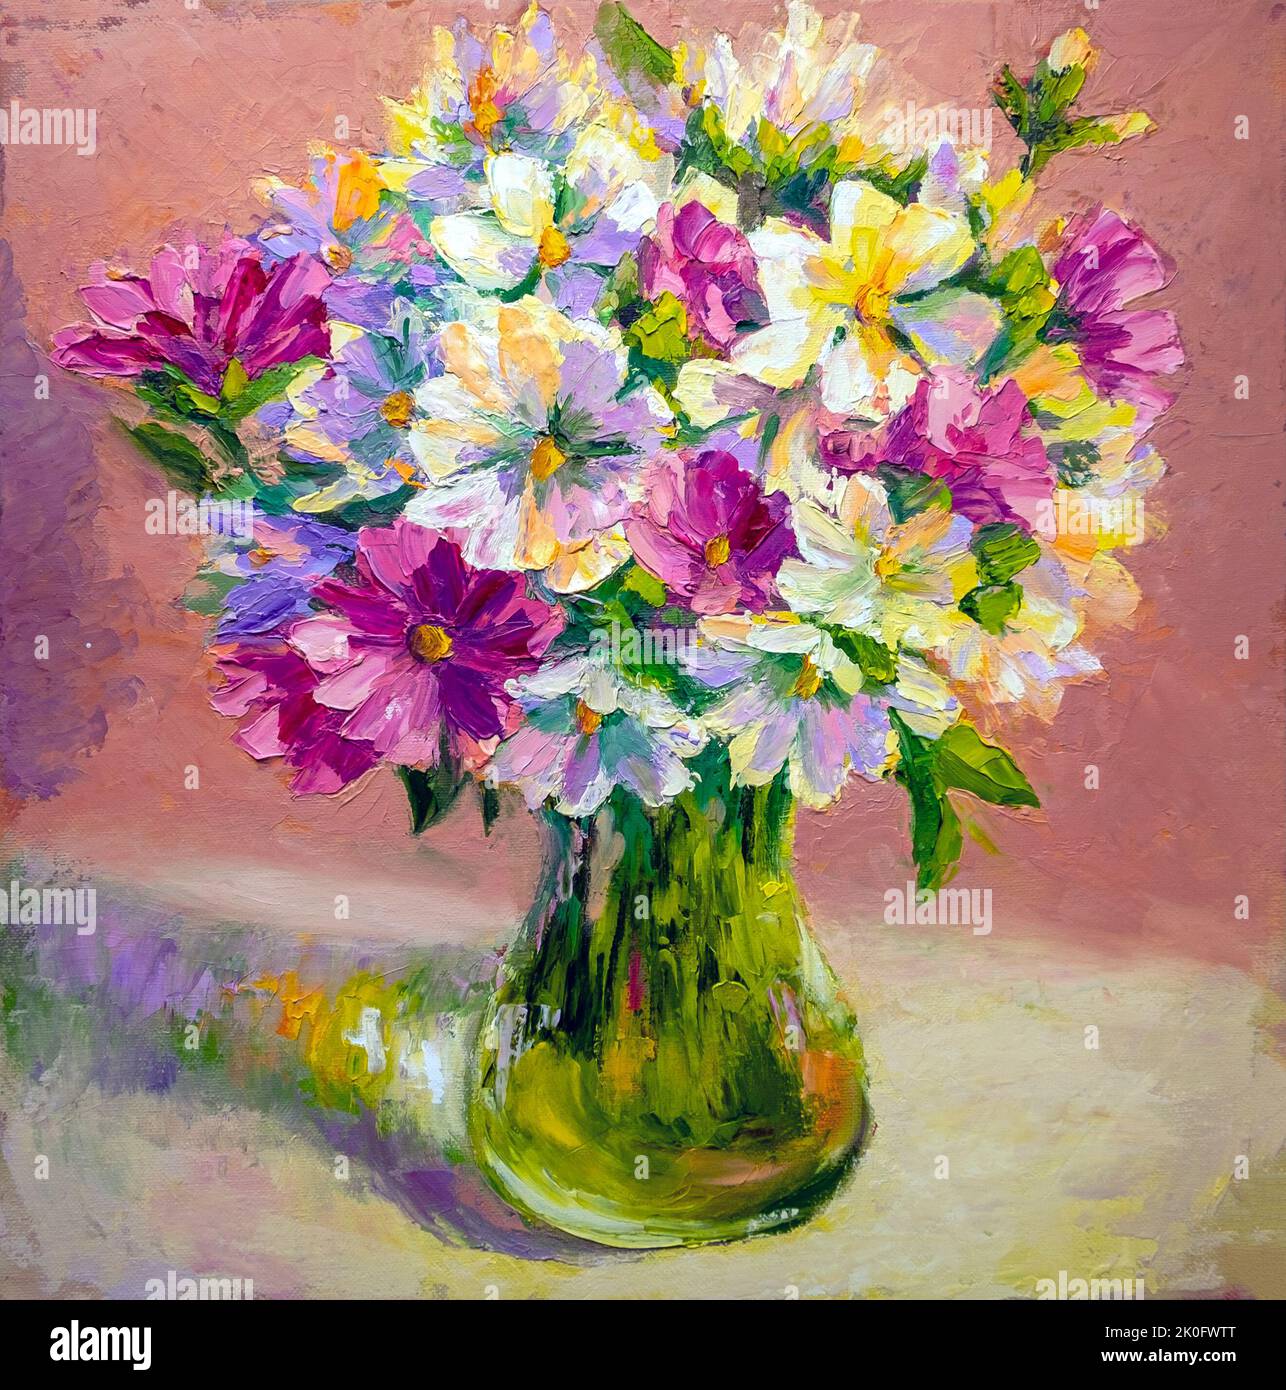 Sunny flowers in glass vase. Still life art, oil painting on canvas Stock Photo